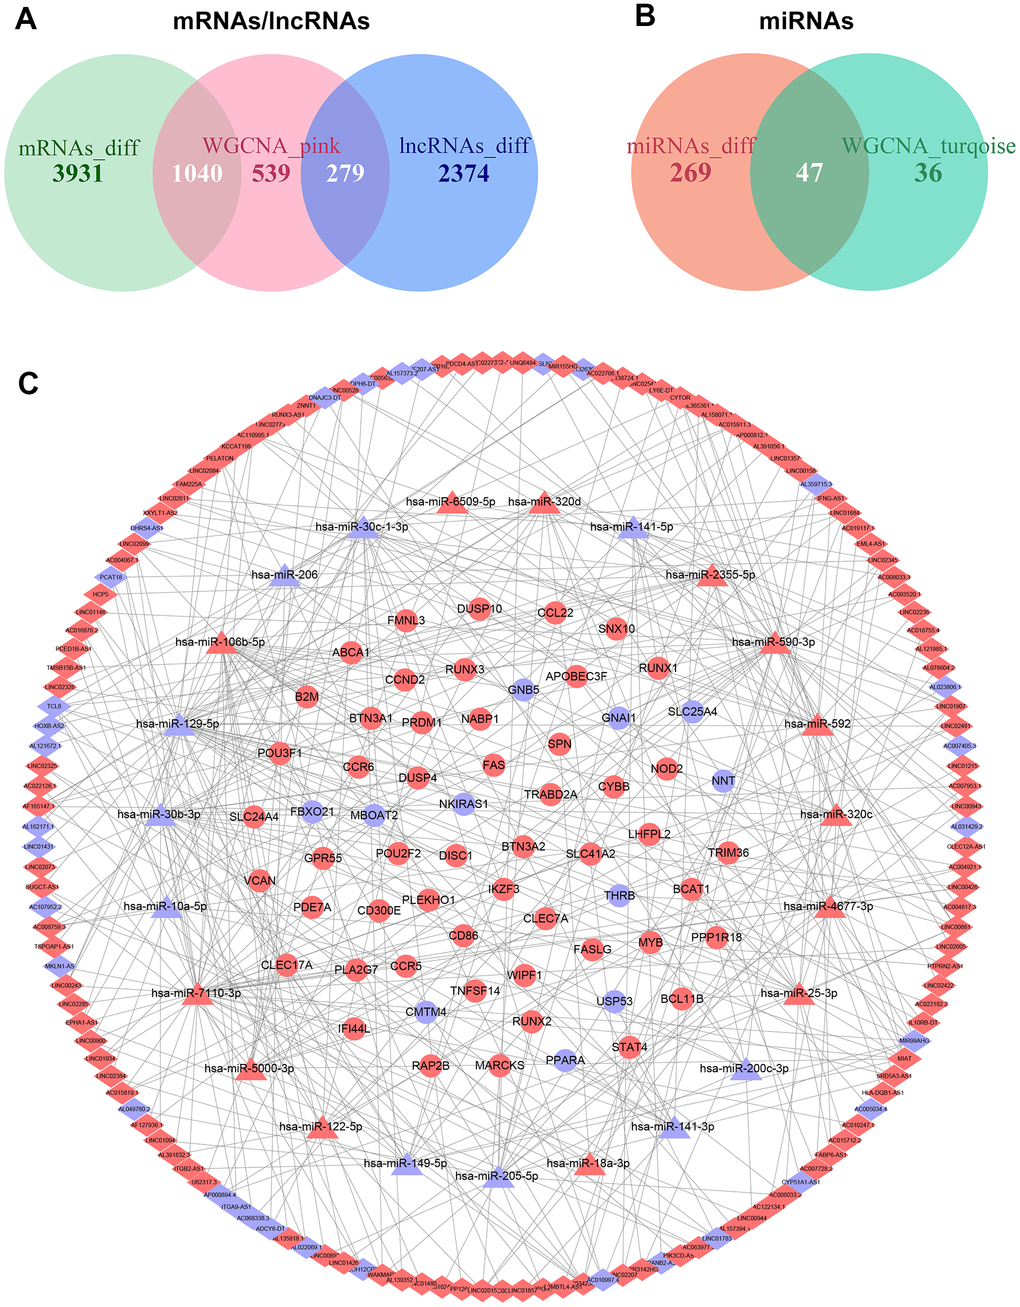 Construction of the ceRNA network in ccRCC. (A) Overlapping mRNAs and lncRNAs between differential gene expression analysis and WGCNA. (B) Overlapping miRNAs between differential gene expression analysis and WGCNA. (C) The ceRNA network was comprised of 144 lncRNAs, 23 miRNAs, and 62 mRNAs; red nodes represent up-regulation, and blue nodes represent down-regulation; diamond nodes represent lncRNAs, triangle nodes represent miRNAs, and ellipse nodes represent mRNAs.